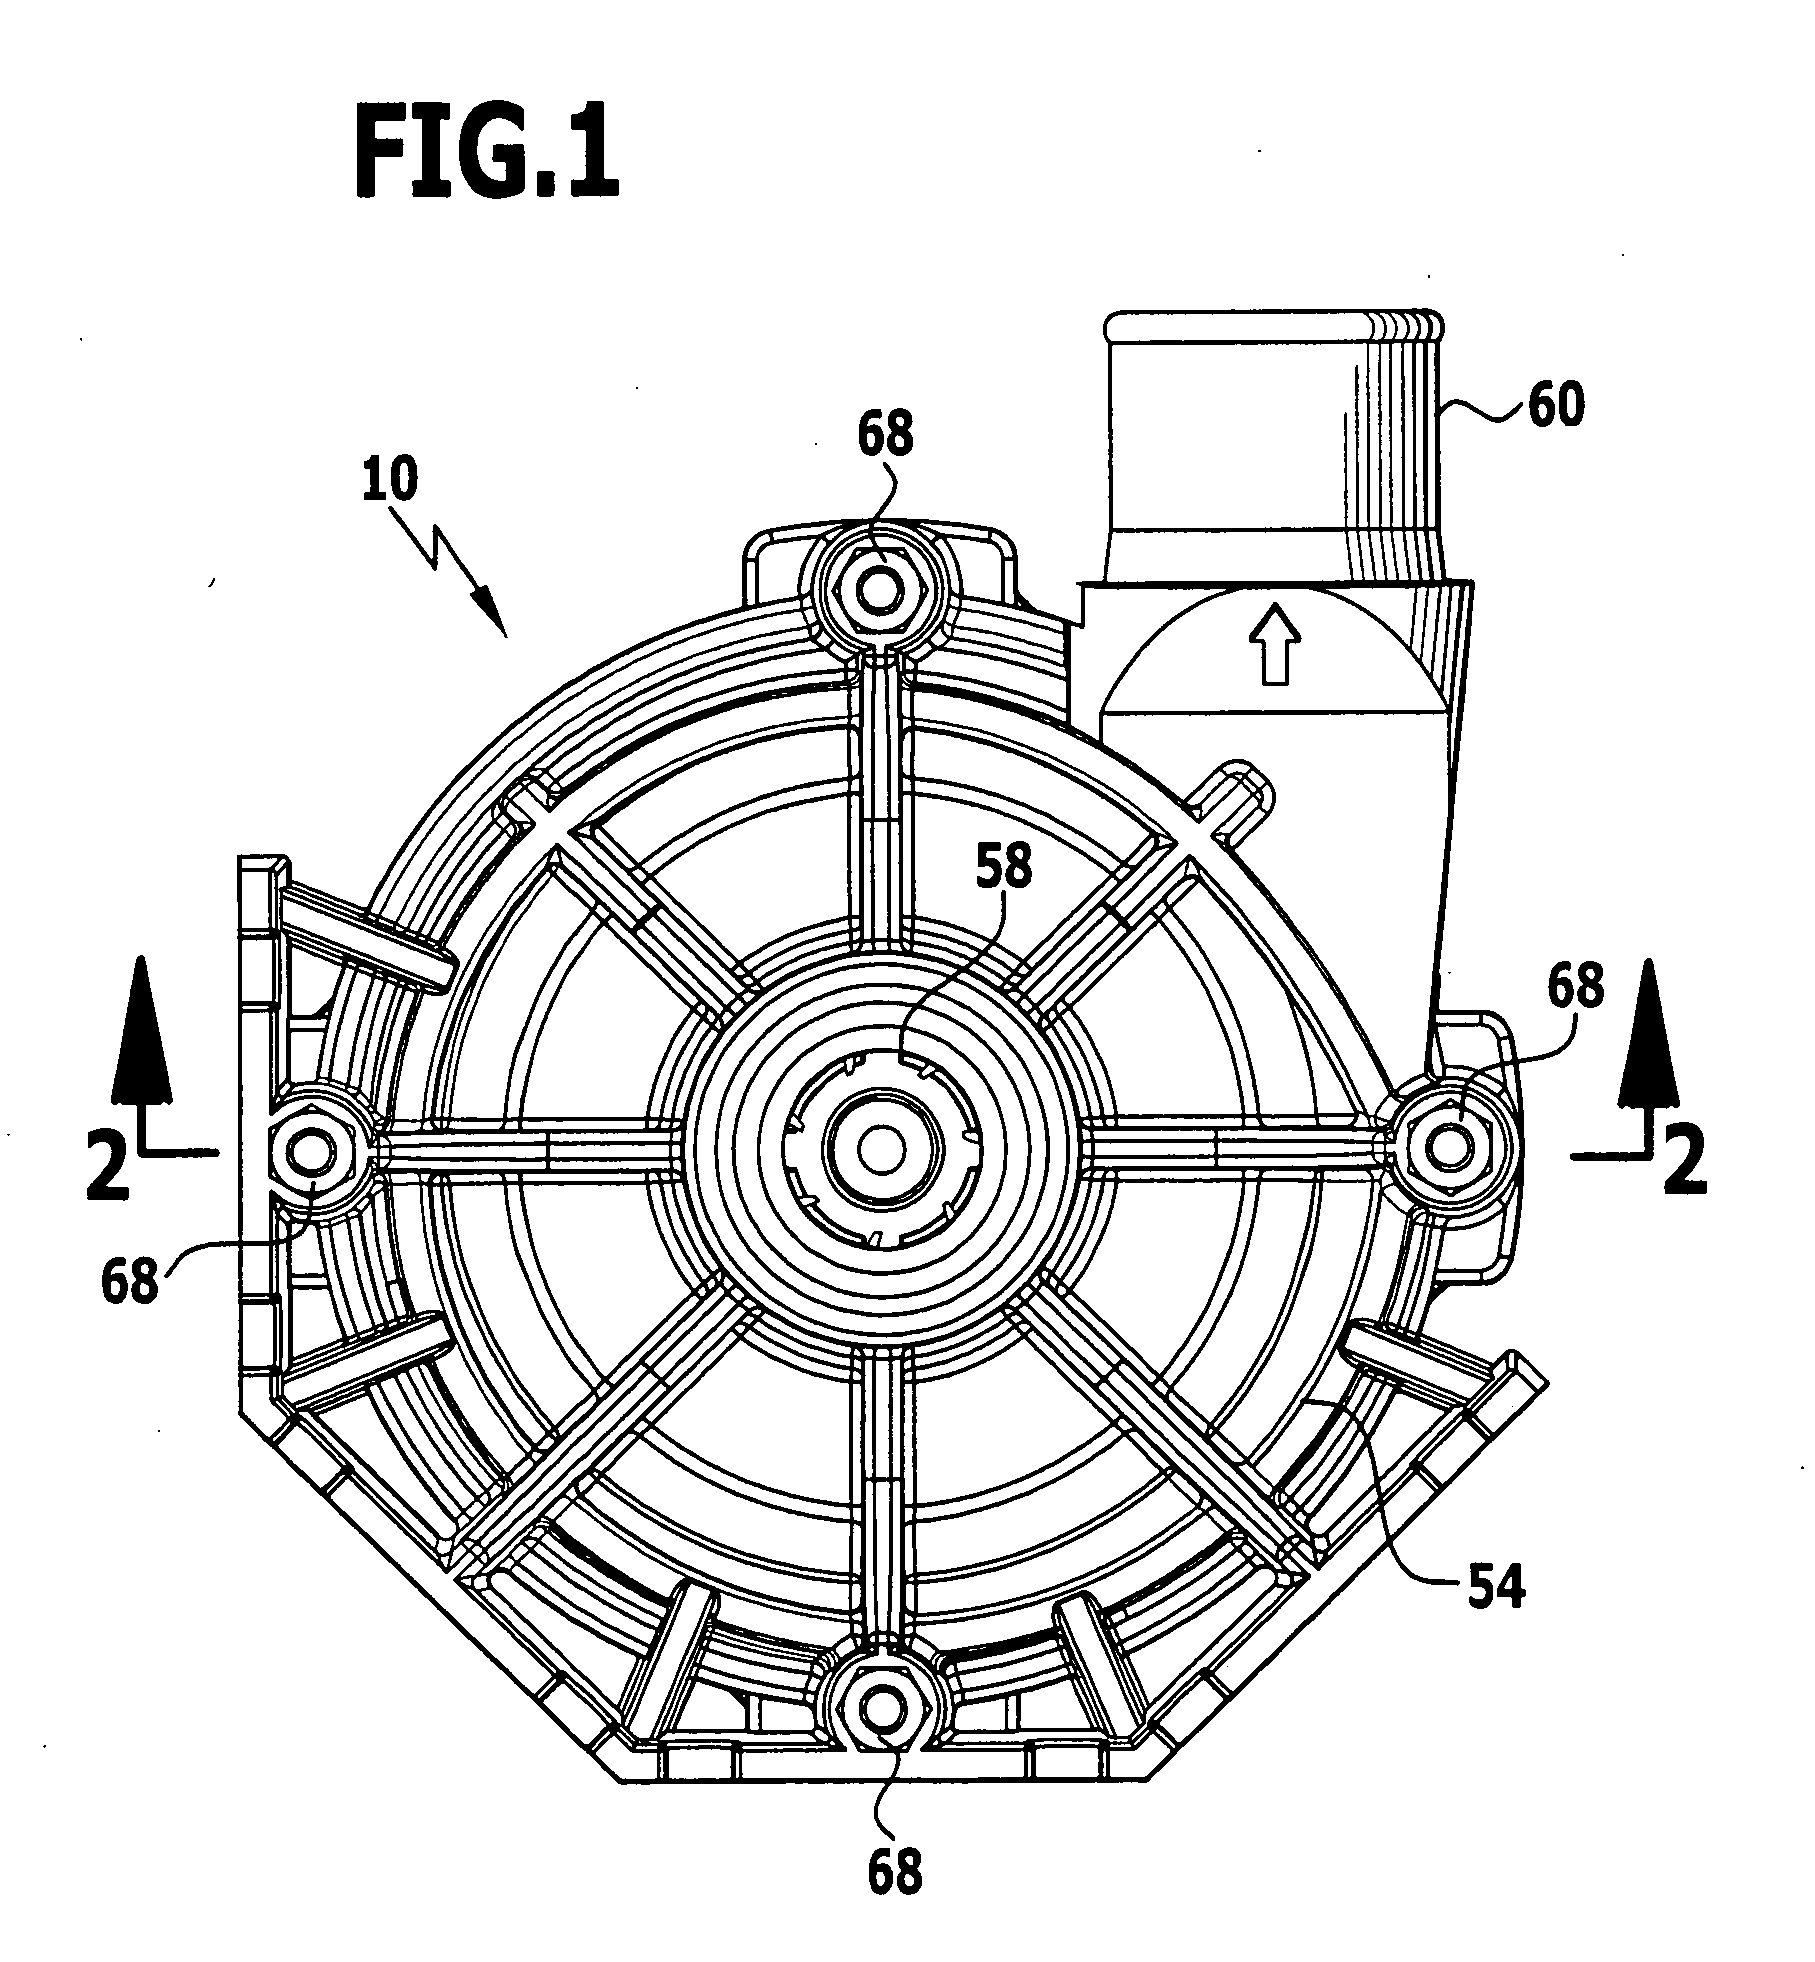 Circulation pump, heating system and method of determining the flow rate of a liquid through a pipe